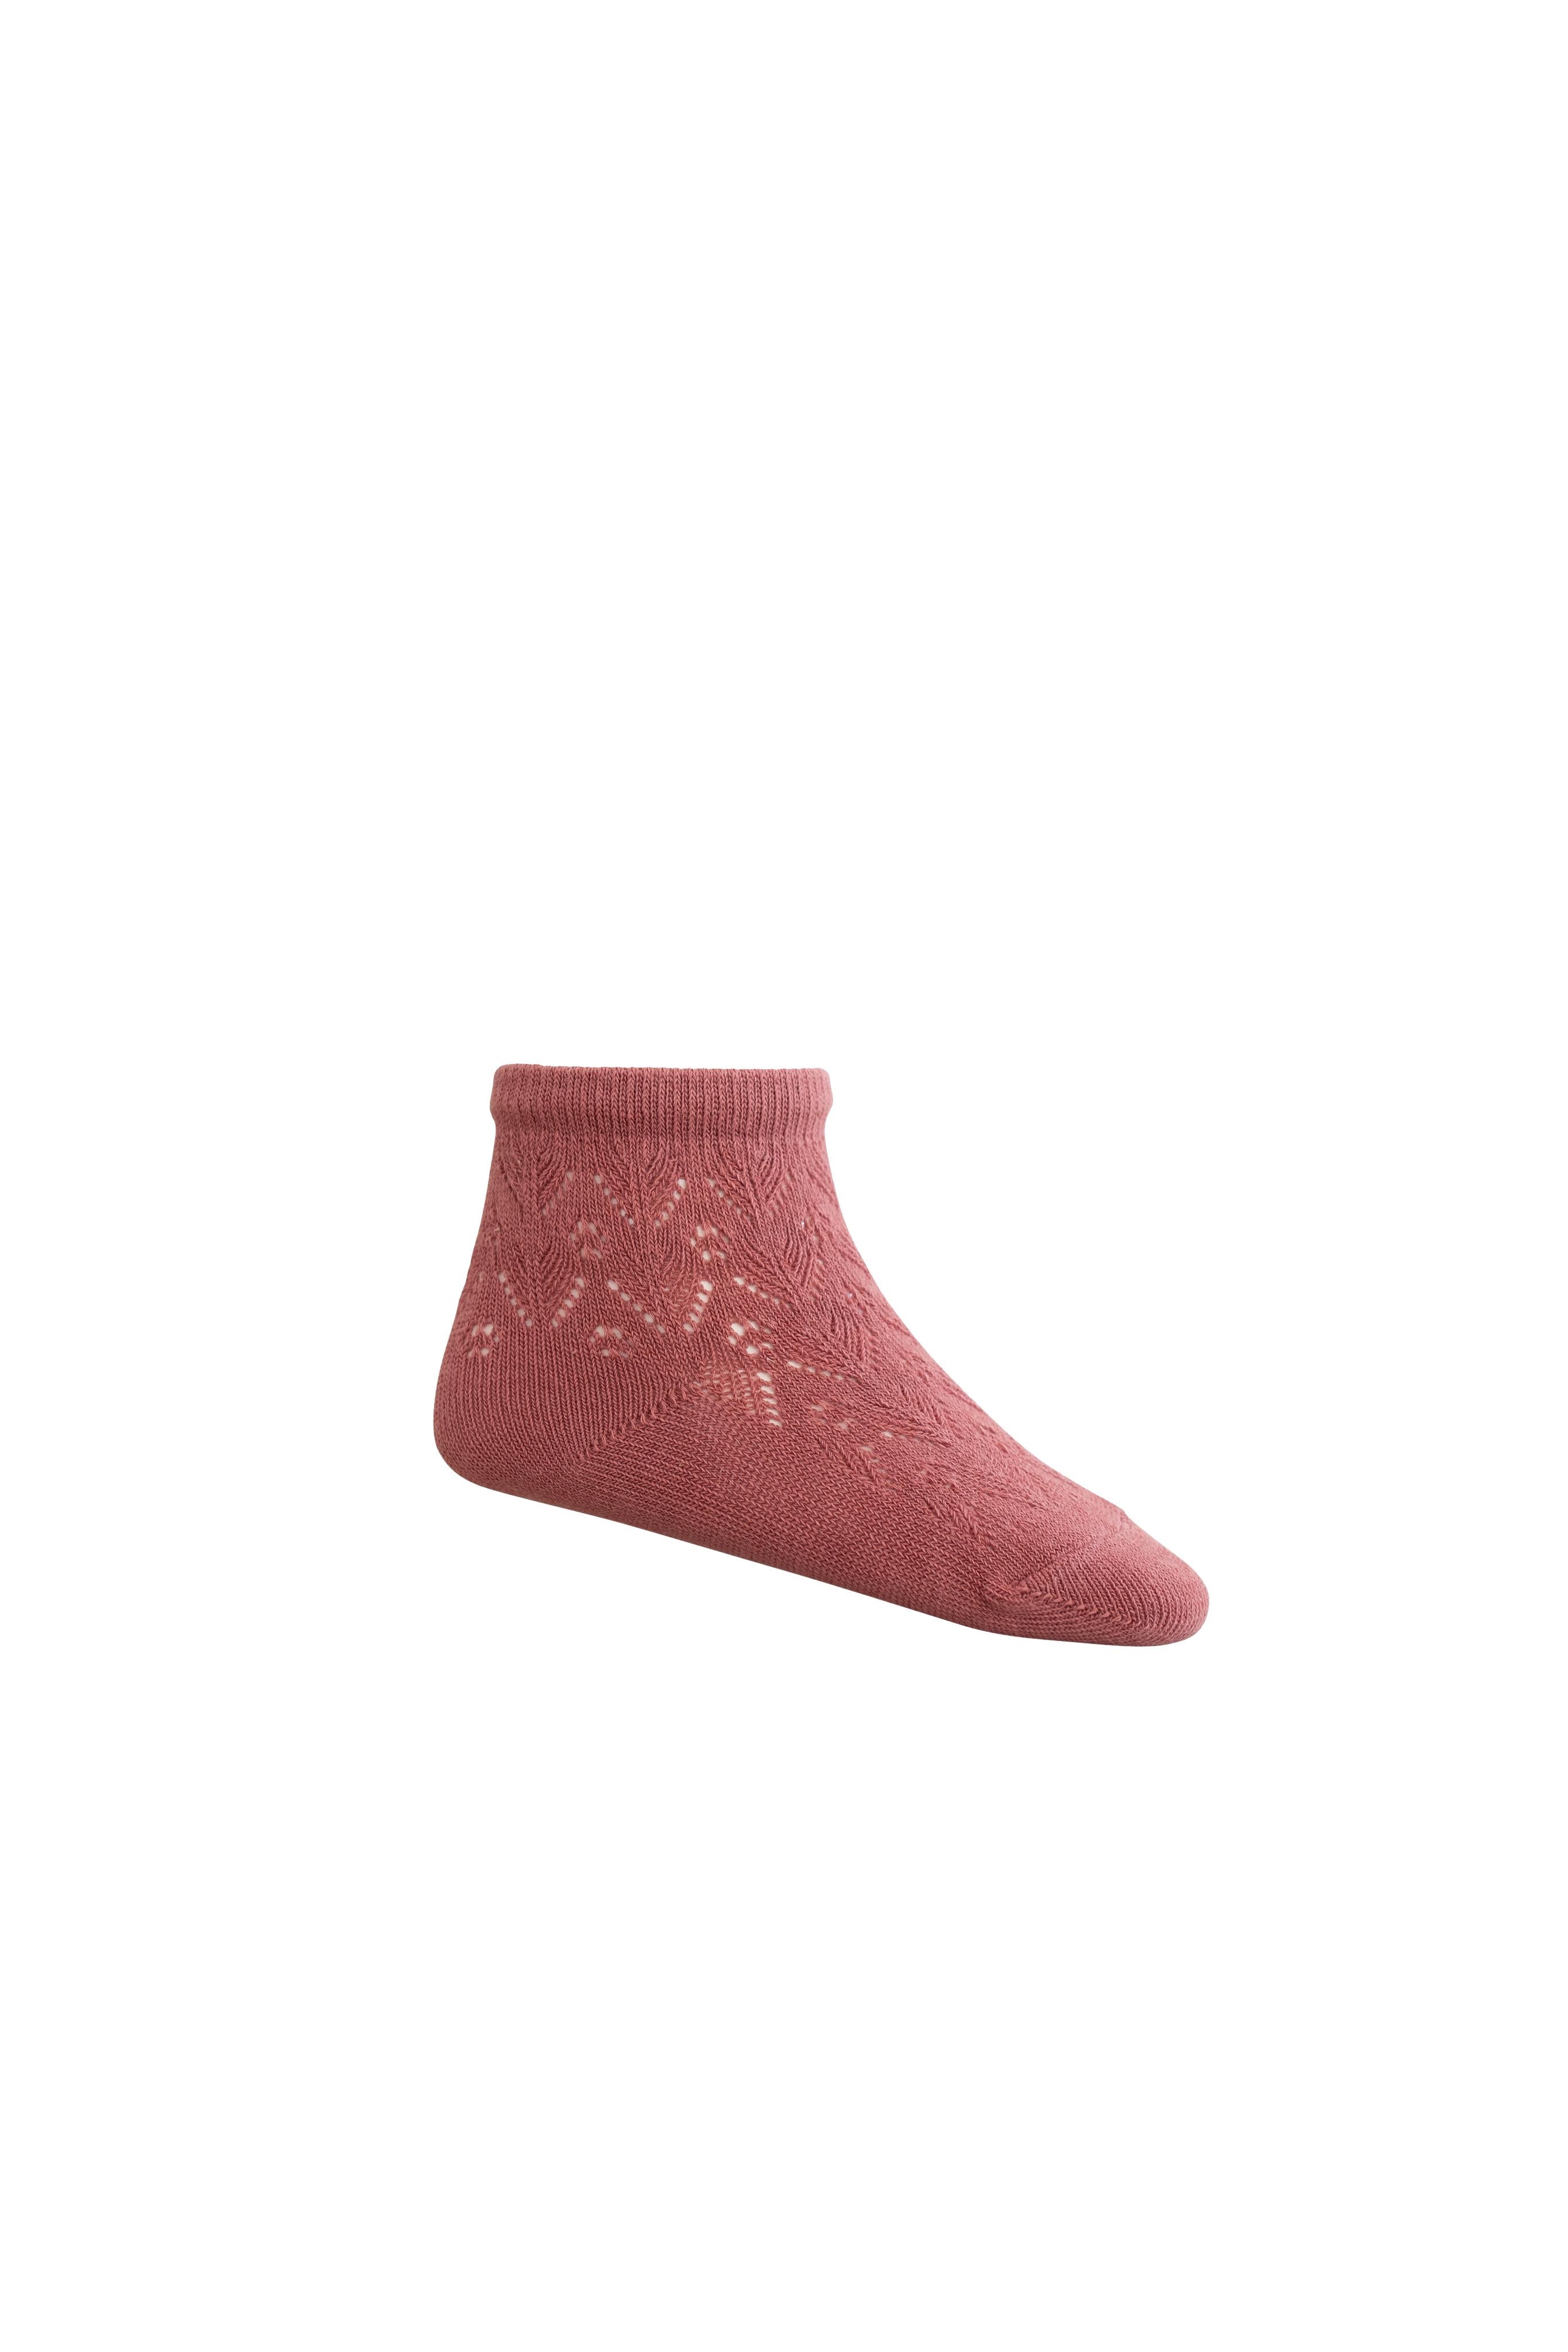 Scallop Weave Ankle Sock - Roselle-Shoes & Socks-Jamie Kay-The Bay Room